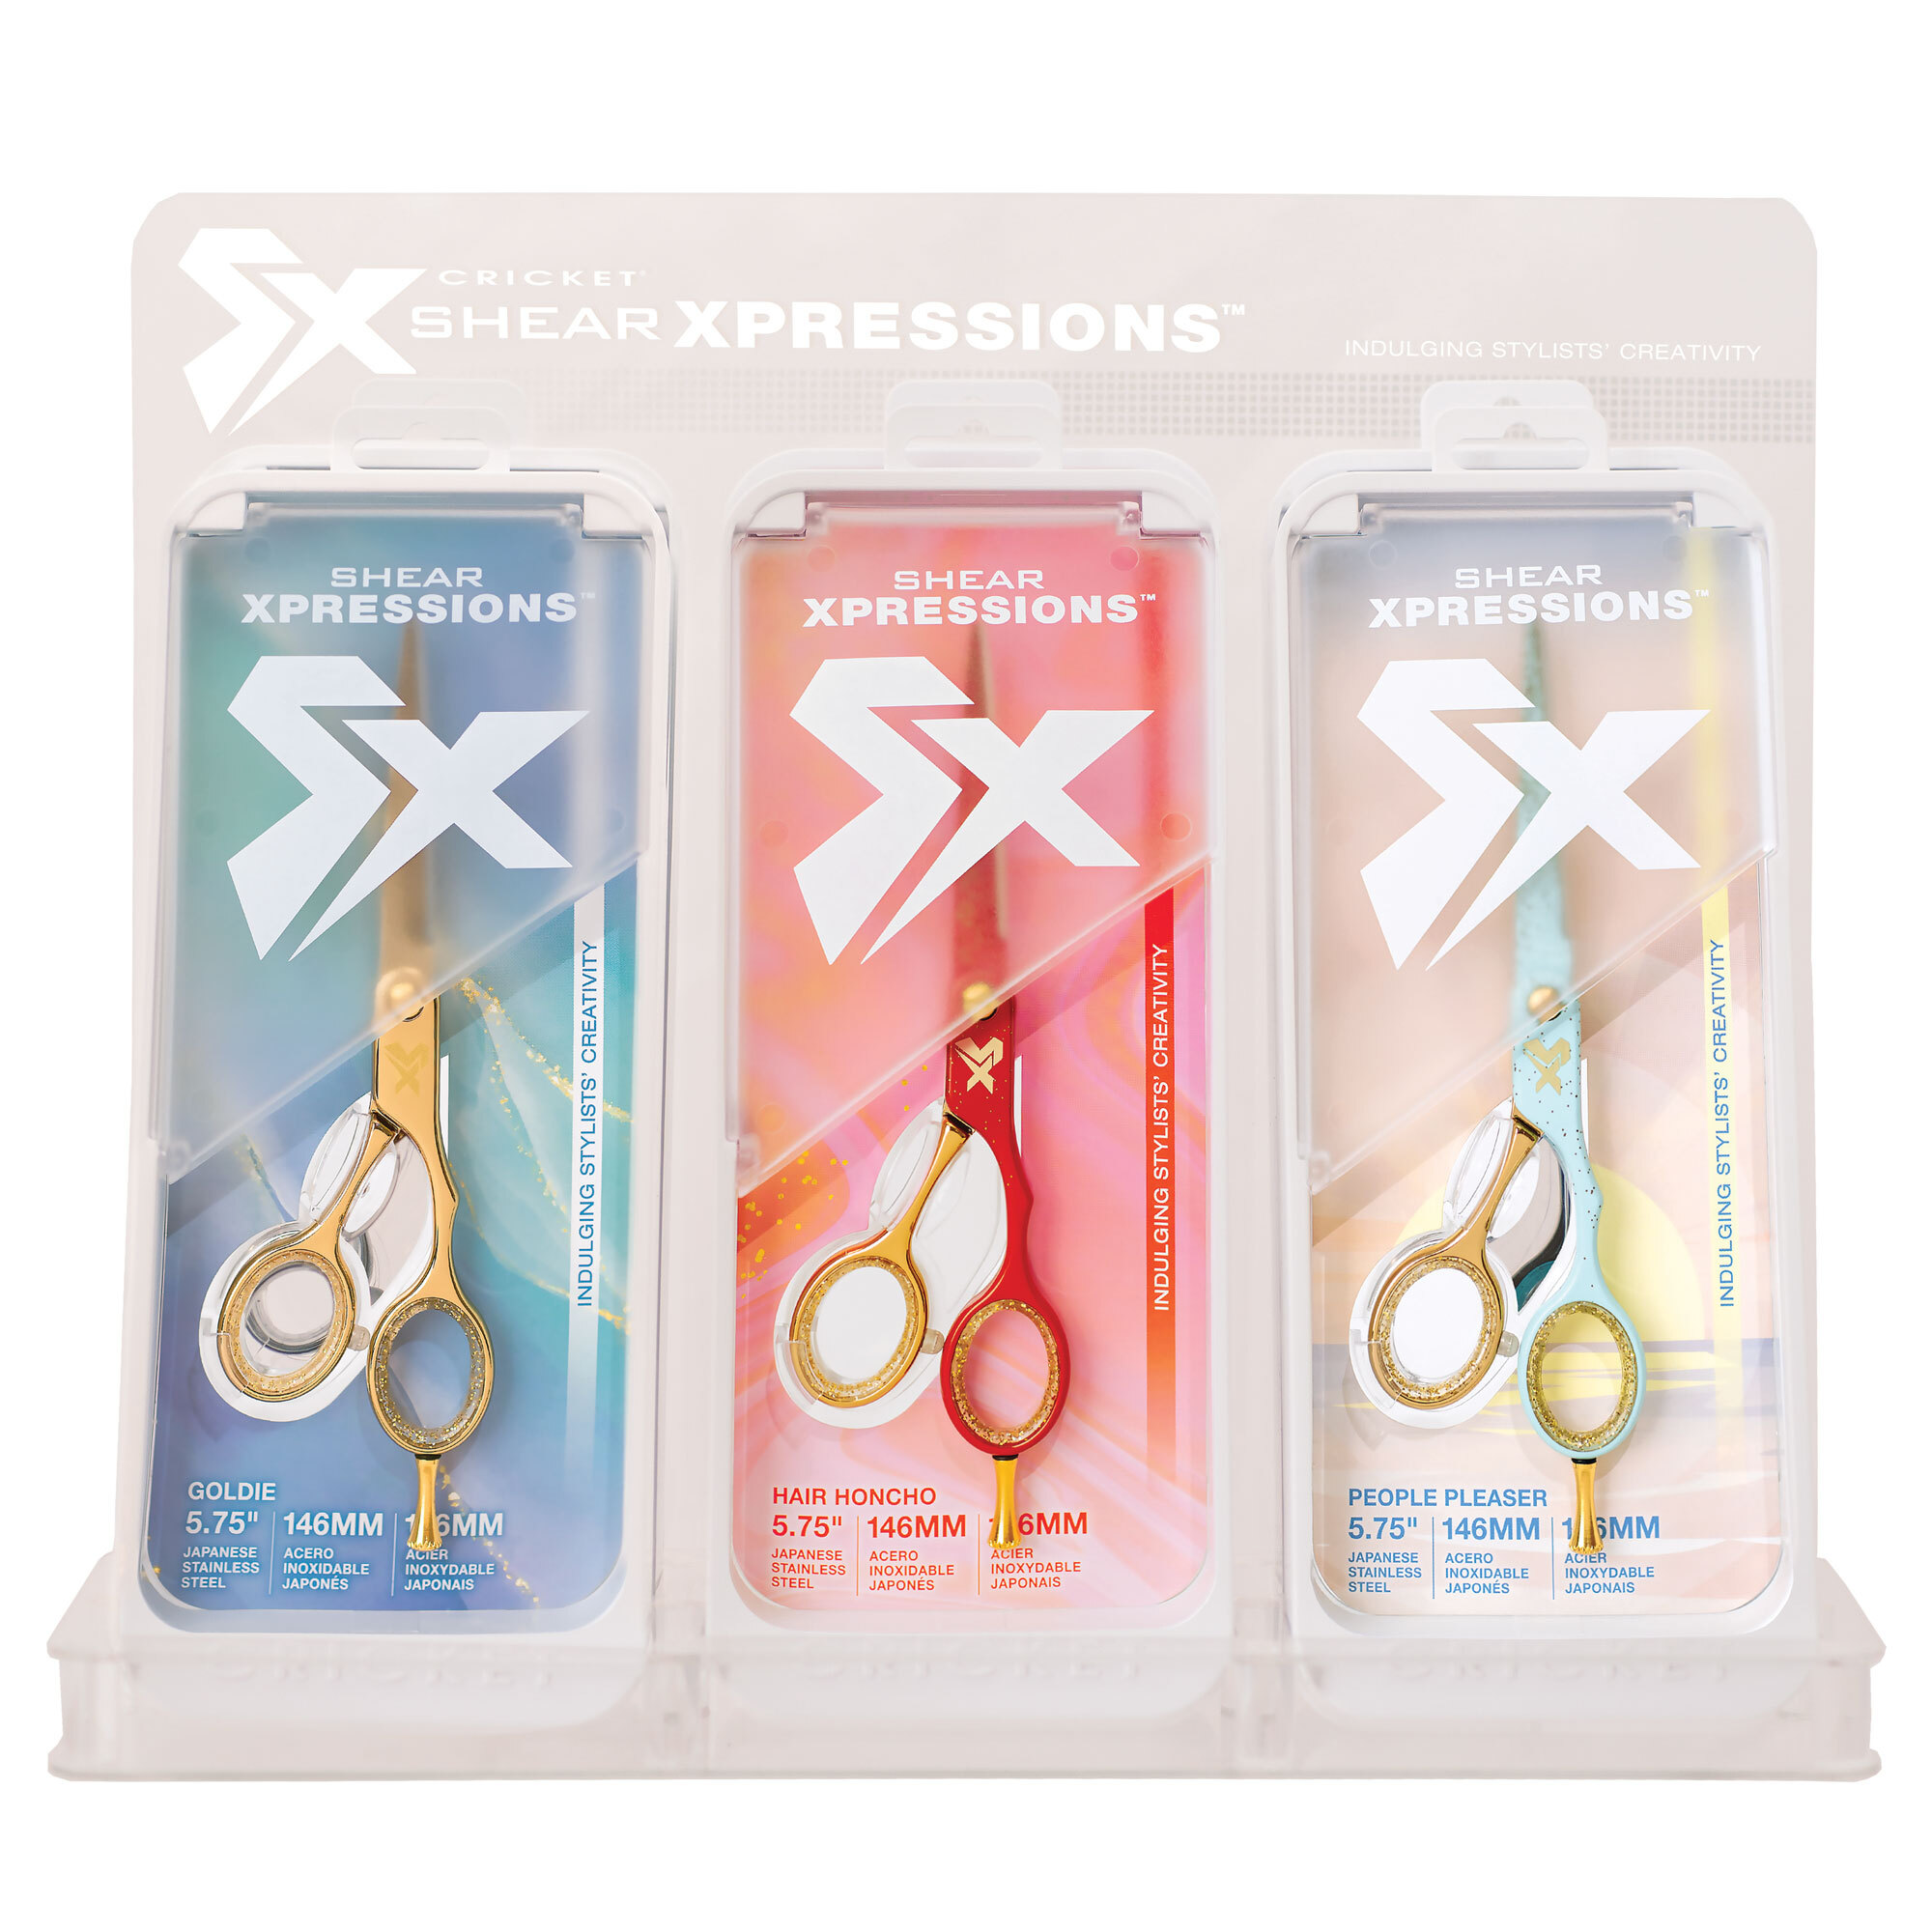 Cricket SHEARS: Shear Xpressions Hustle & Shine Collection 6pc Display